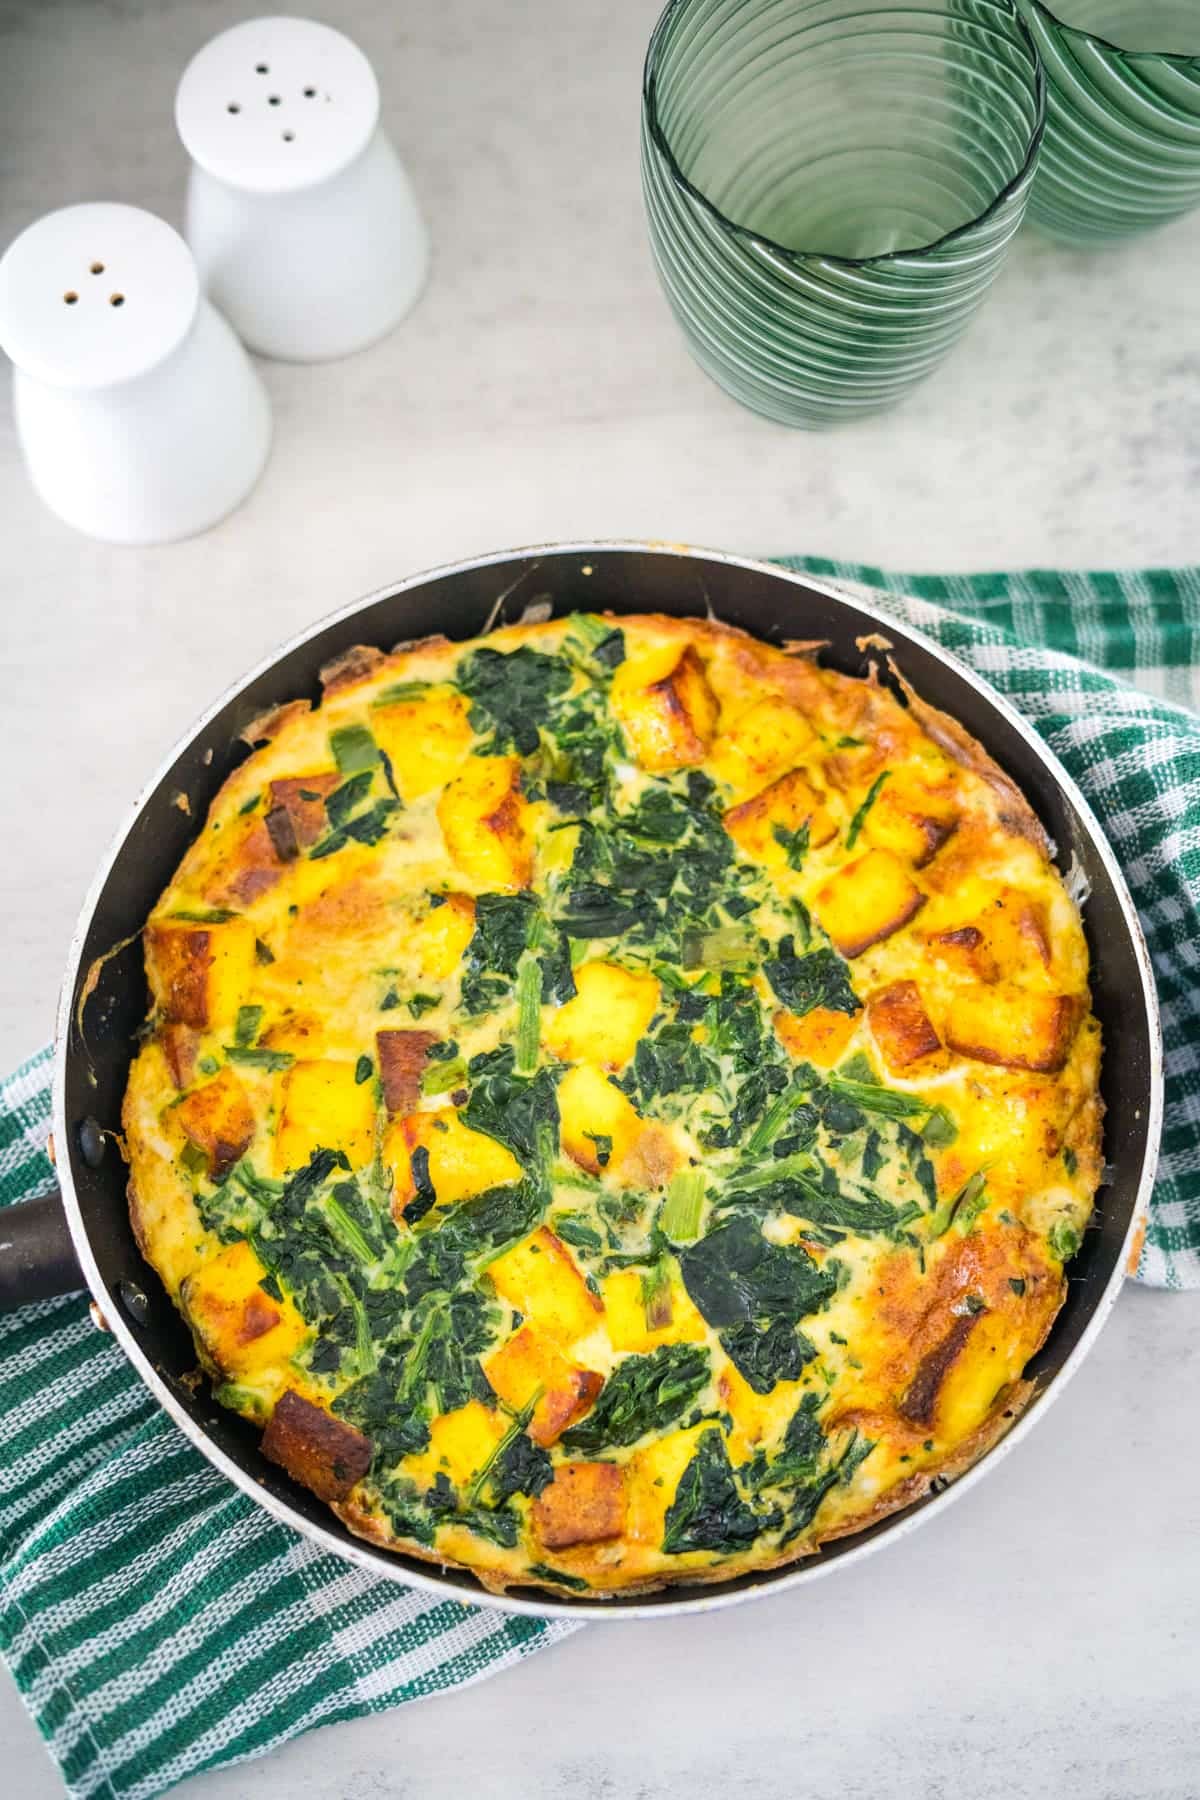 A quiche with spinach and cheese in a skillet.